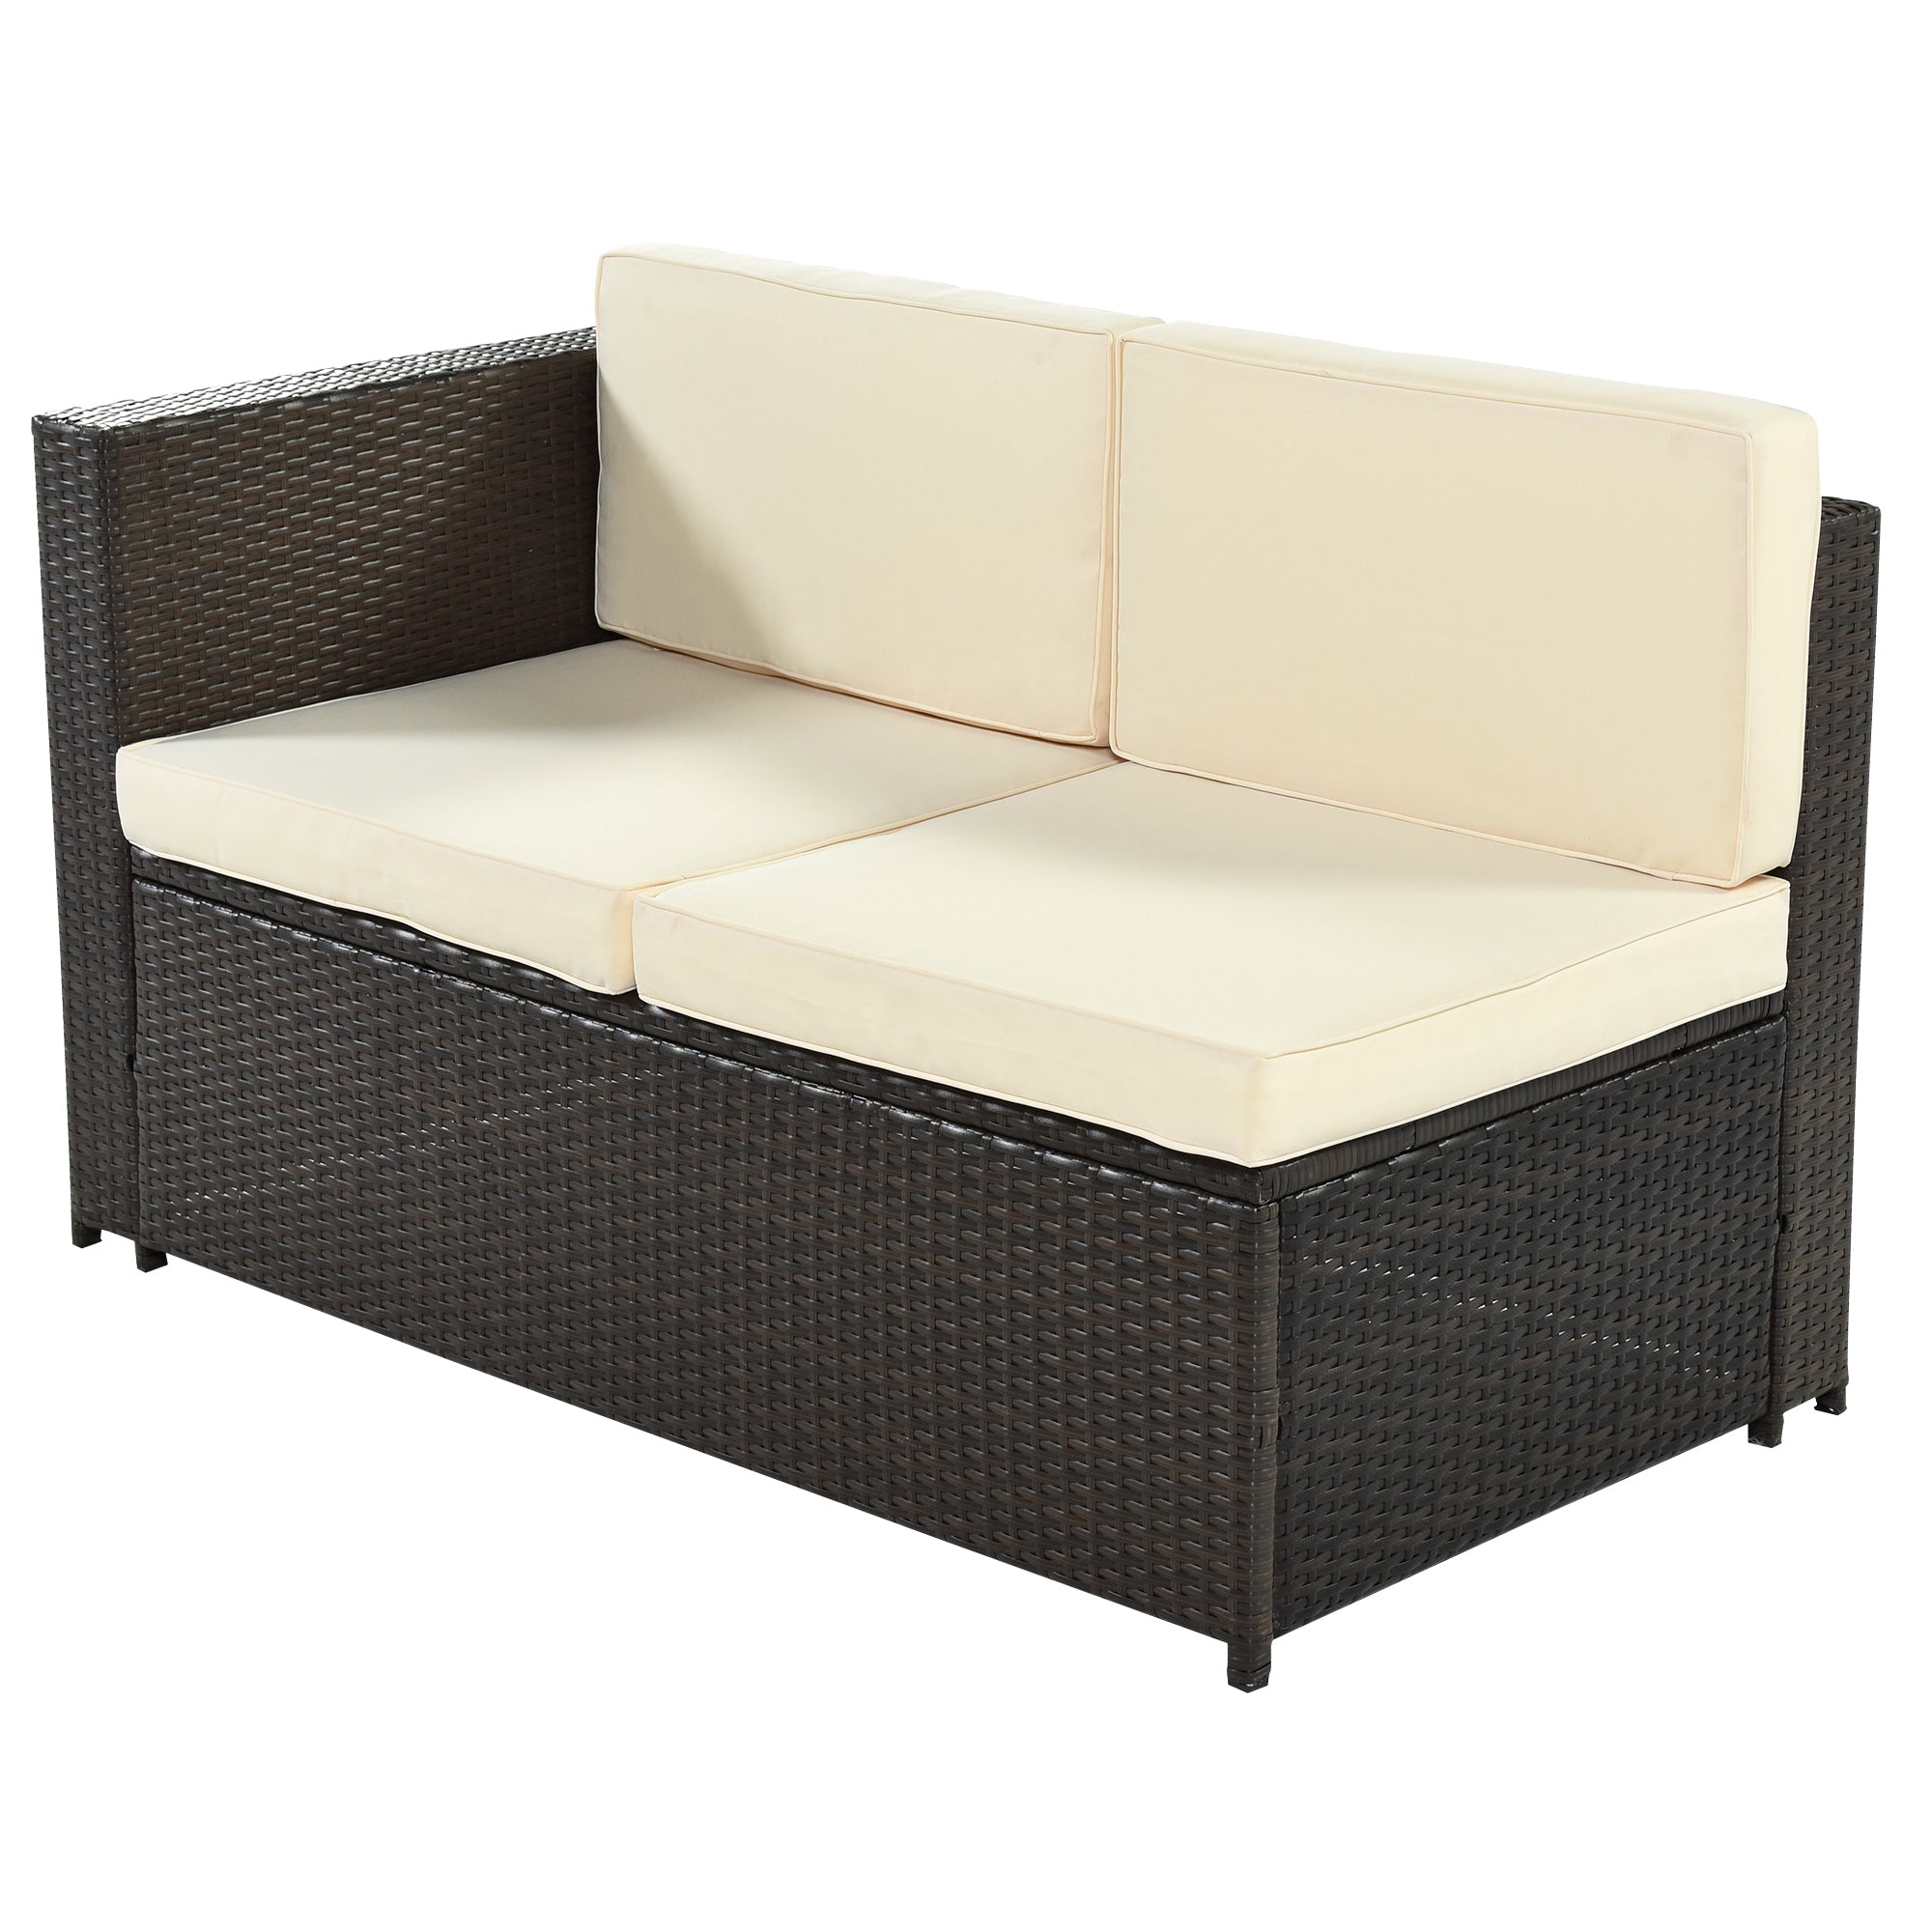 U Style 9 Piece Rattan Sectional Seating Group with beige-rattan